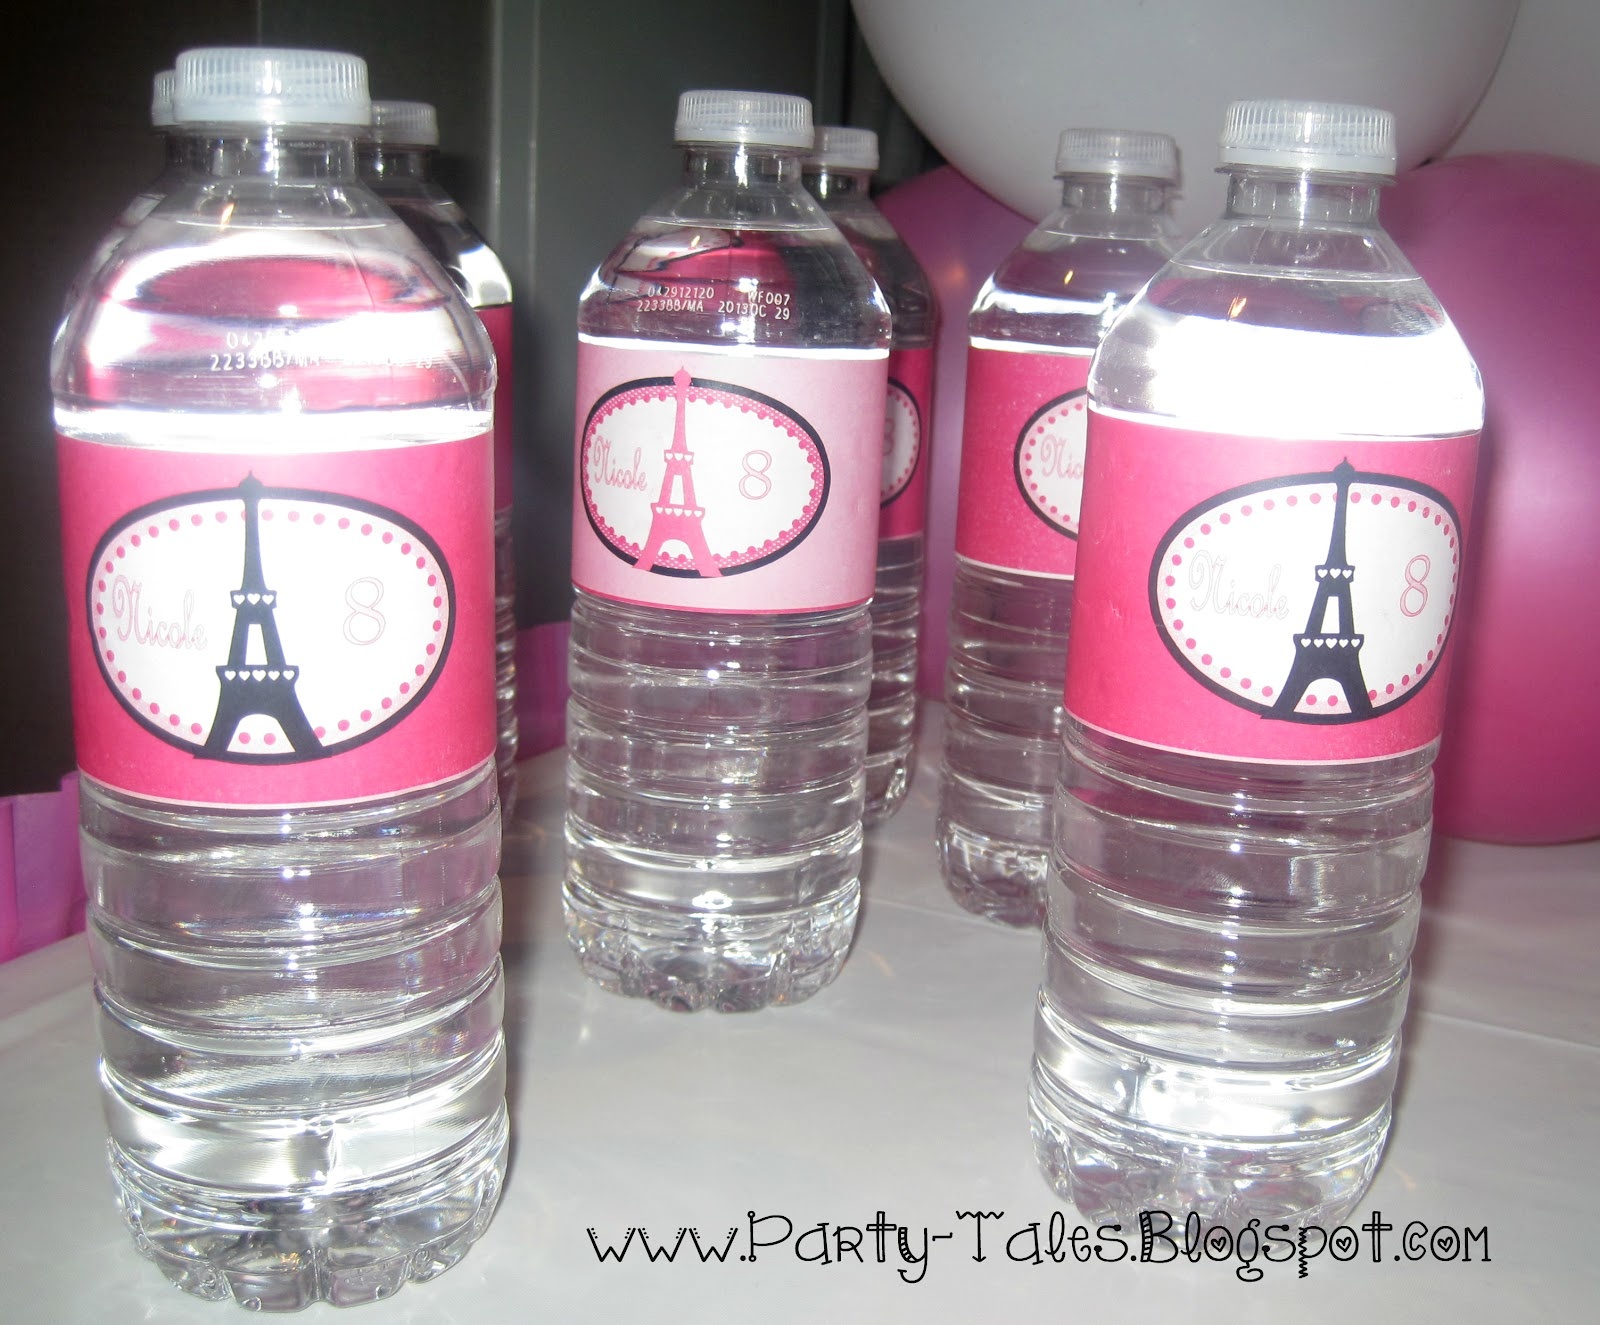 Party-Tales: July 2012 - Free Printable Paris Water Bottle Labels